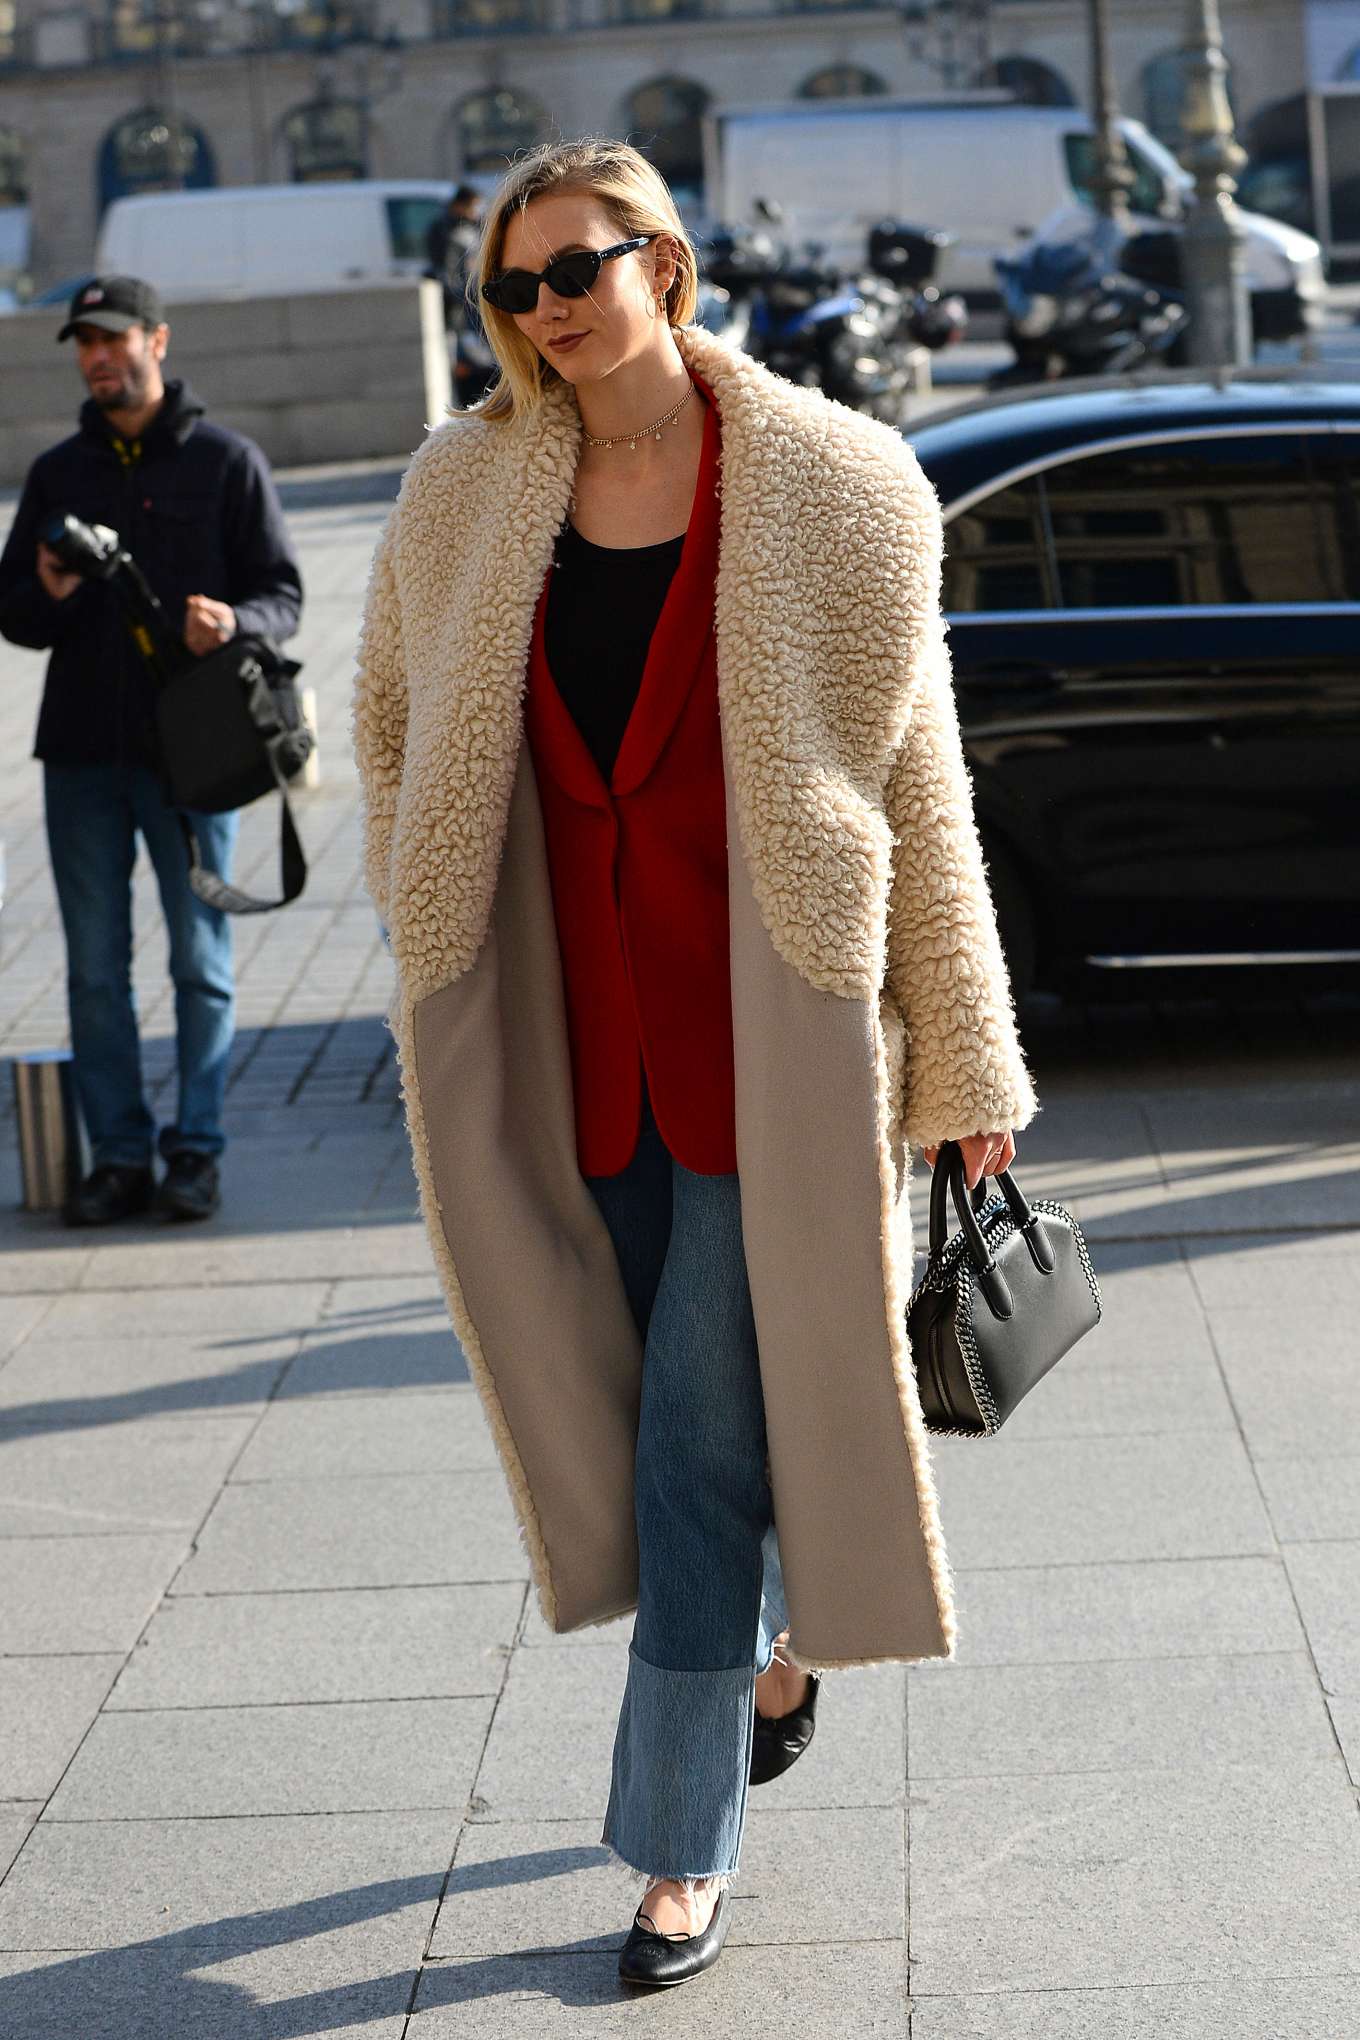 Karlie Kloss in Long Coat - Out and about in Paris-12 | GotCeleb